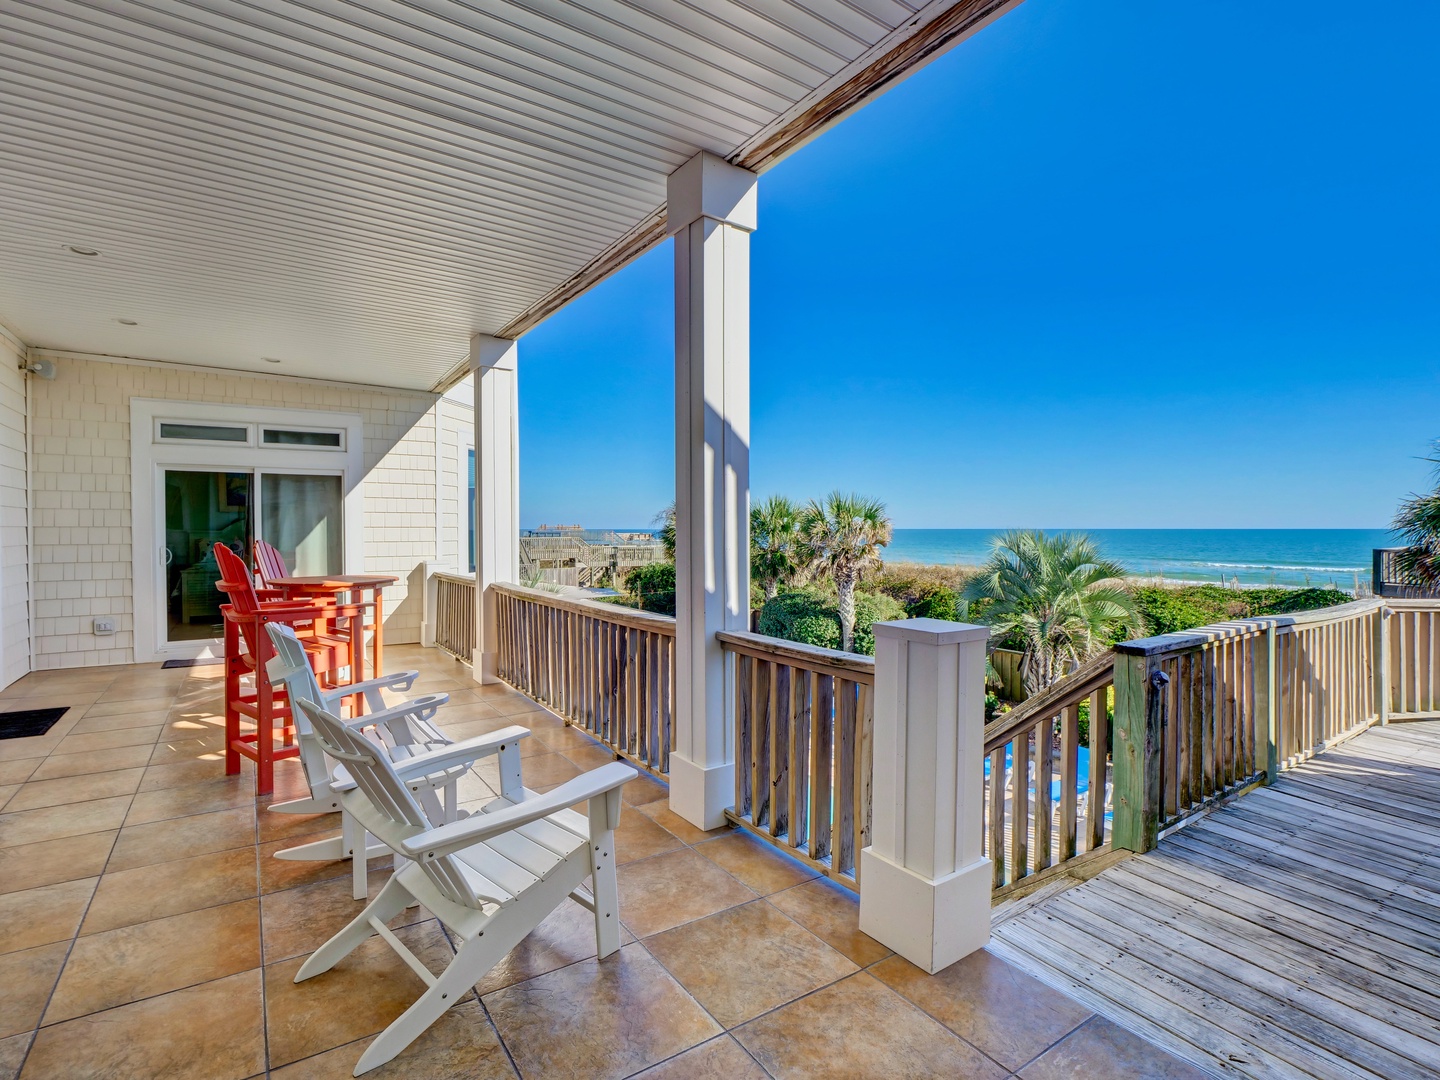 The first level covered oceanfront porch